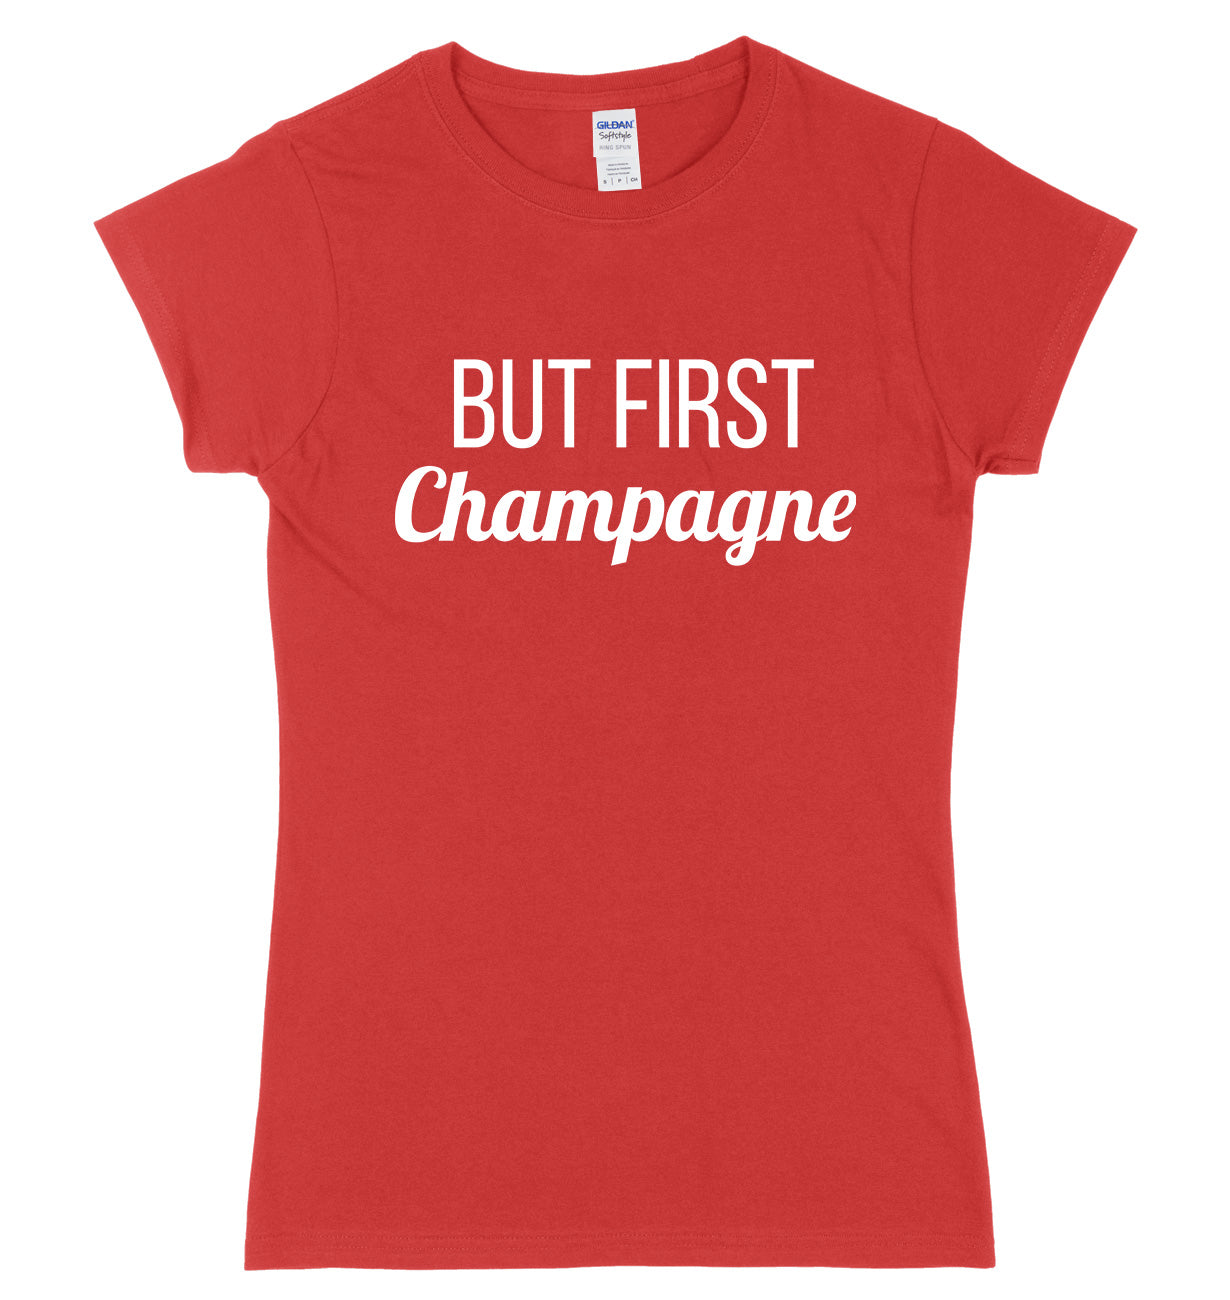 But First Champagne Womens Ladies Slim Fit T-Shirt